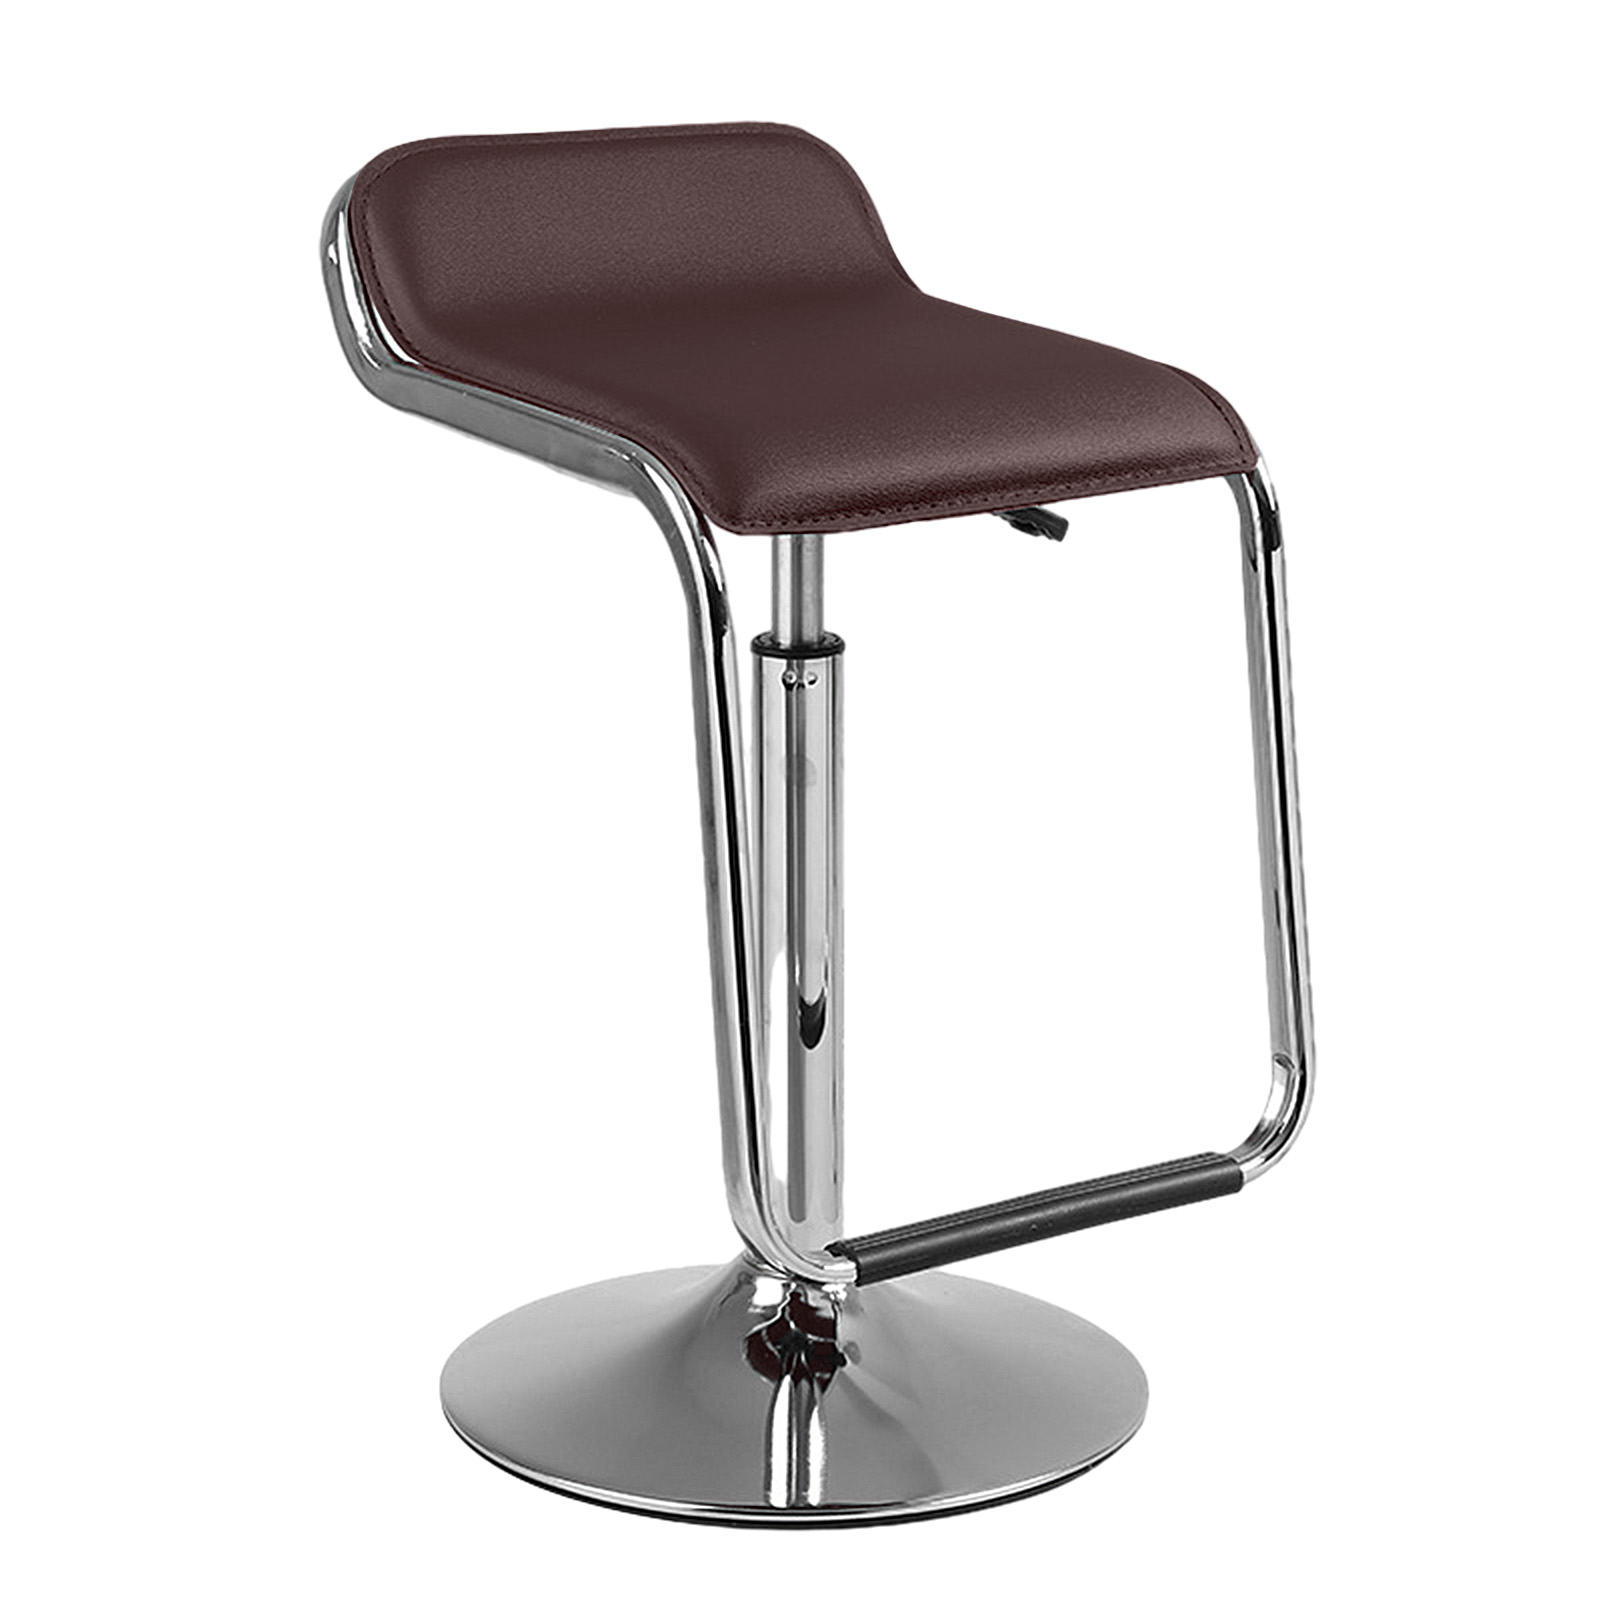 S chair round drag - Brown